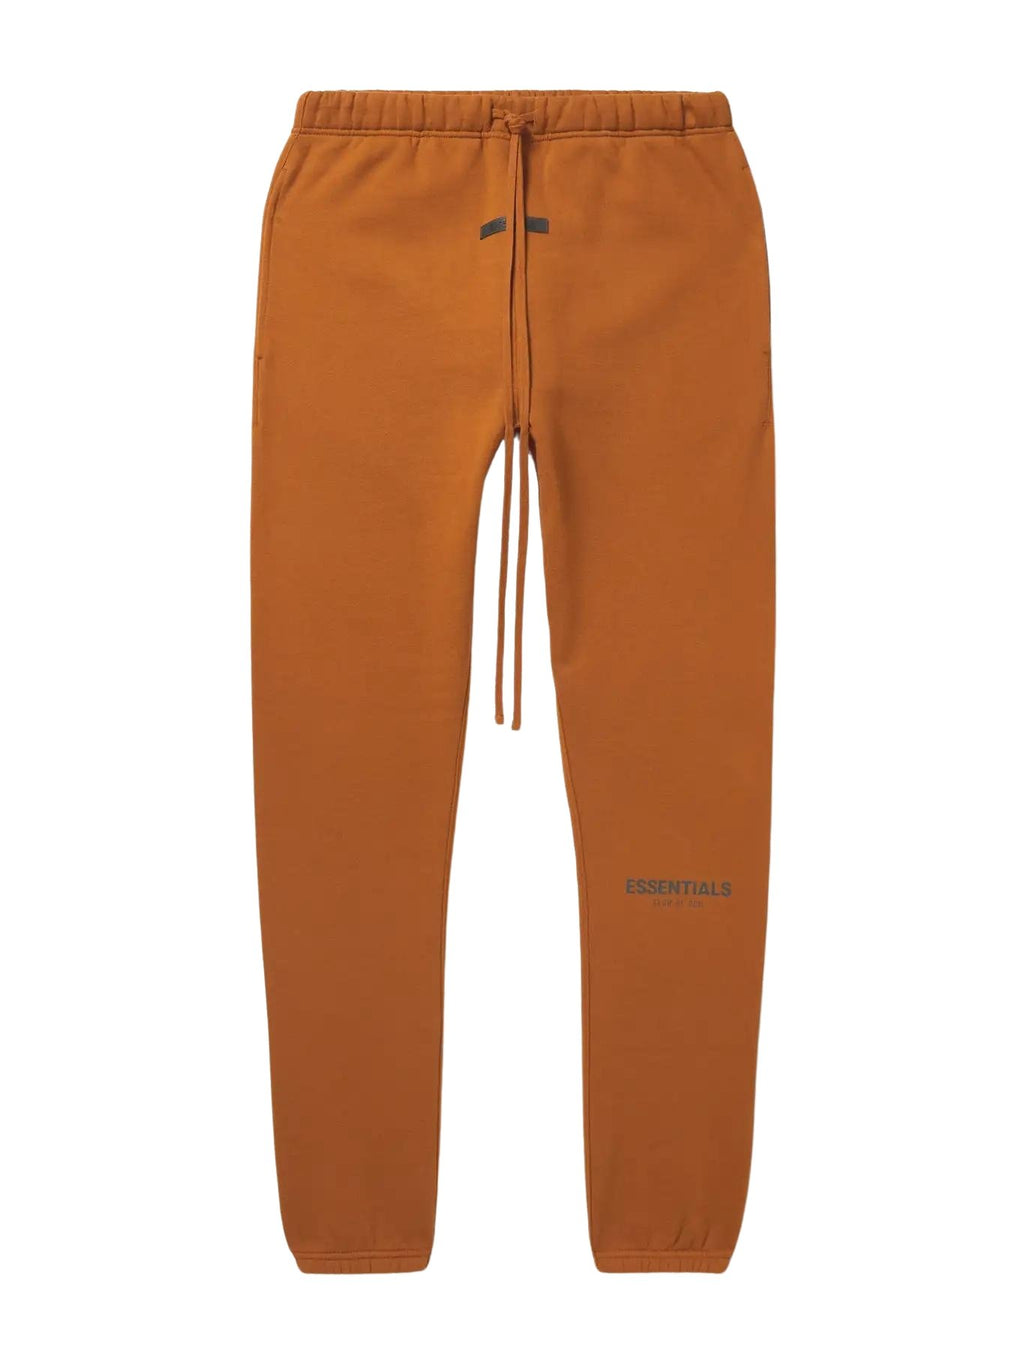 FEAR OF GOD ESSENTIALS LIGHT BROWN CORE COLLECTION SWEATPANTS - Hype Locker UK